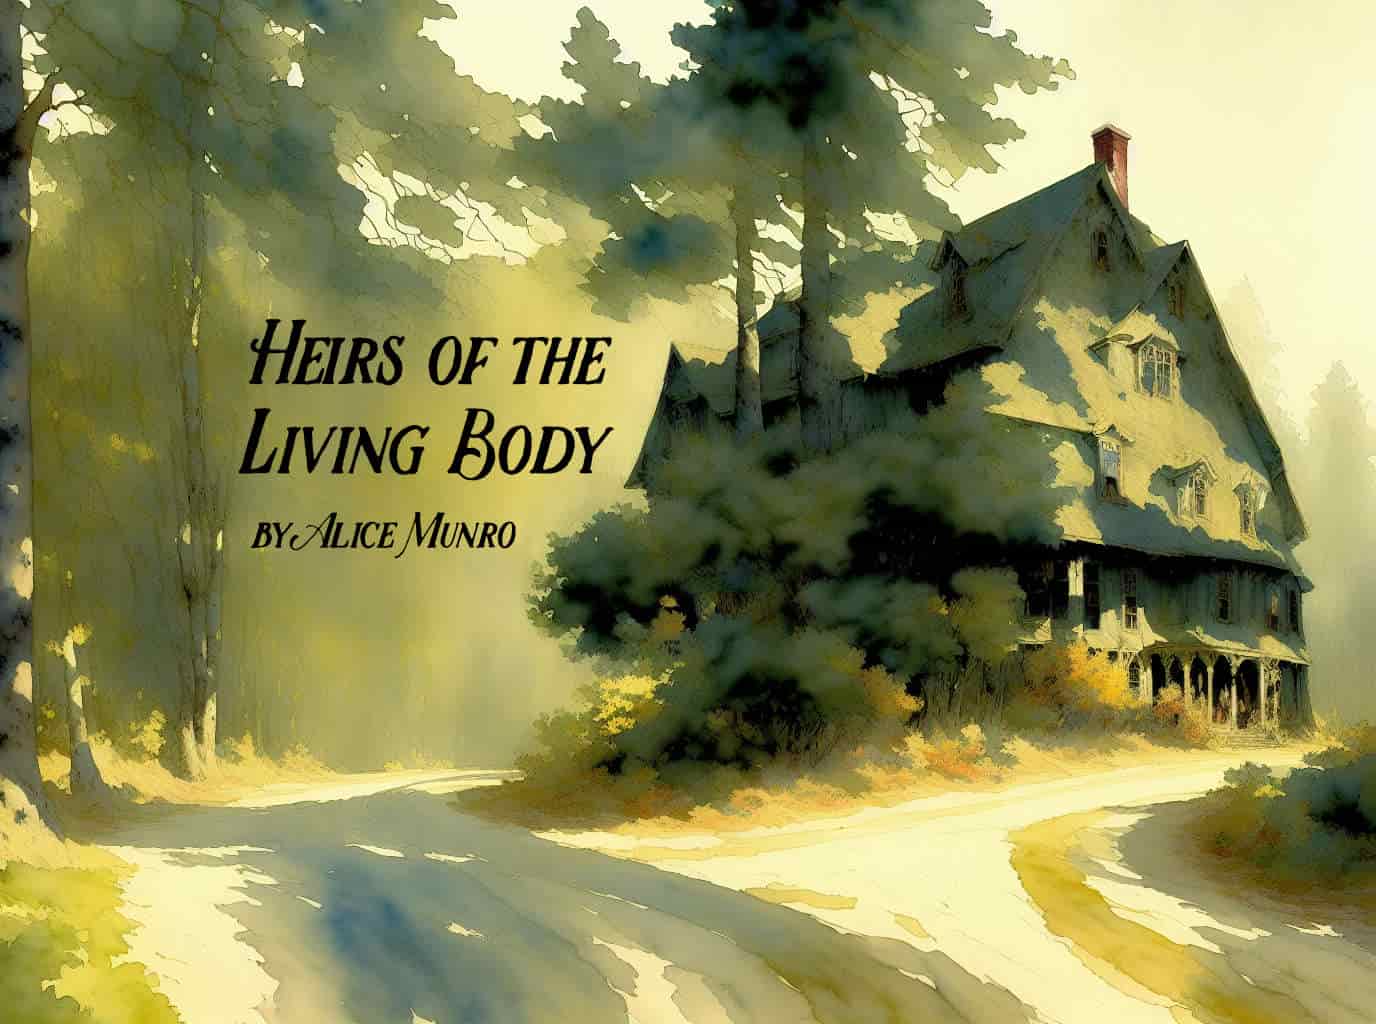 Heirs of the Living Body by Alice Munro